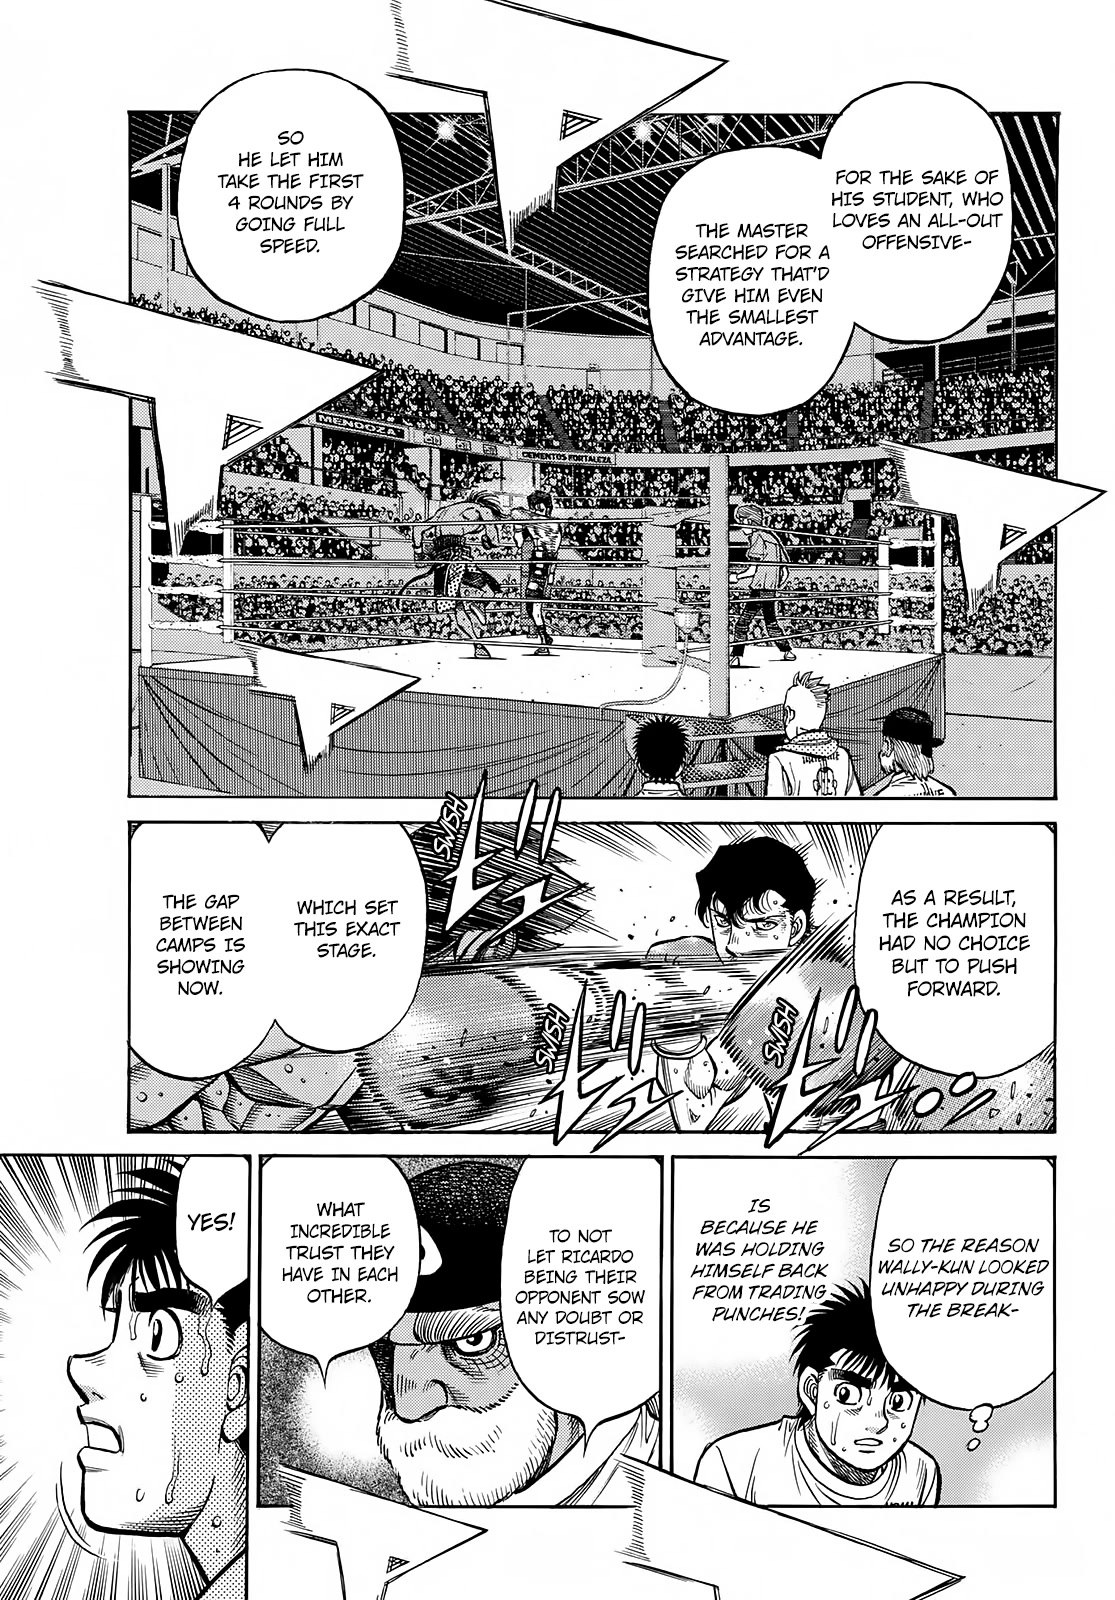 Hajime no Ippo, Chapter 1402 The Gap Between Their Camps image 16